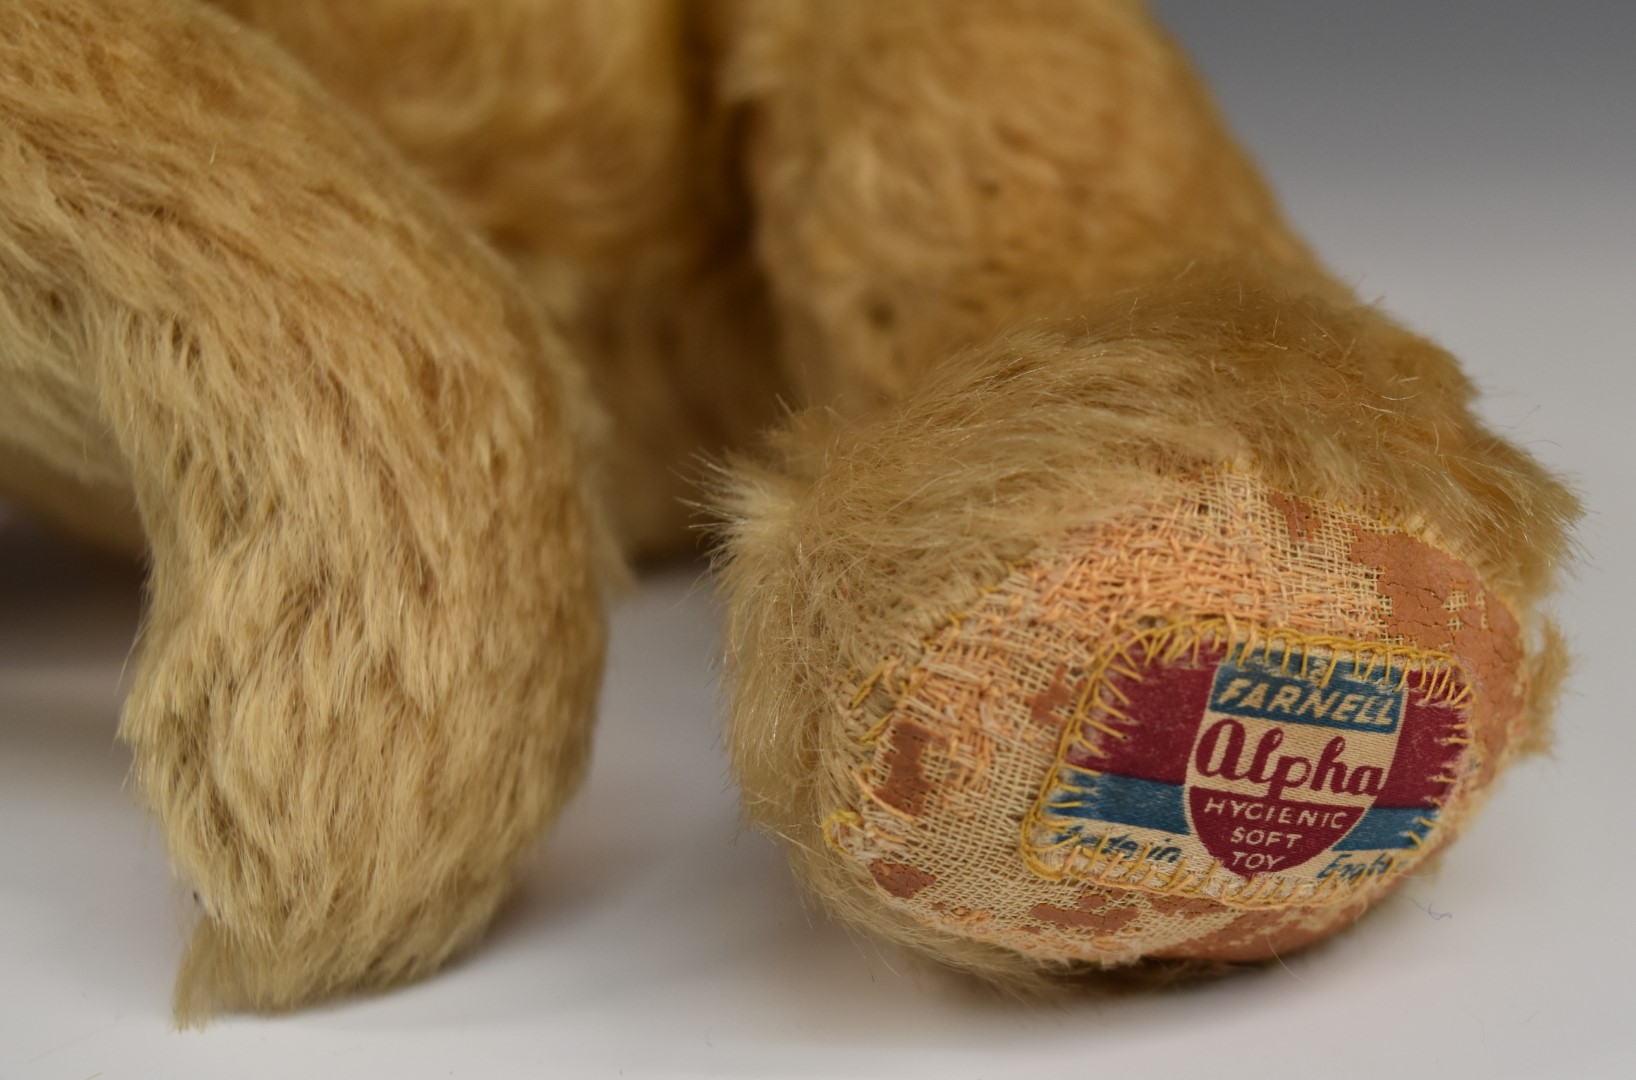 Farnell Alfa Teddy bear with blonde mohair, soft filling, disc joints, cloth pads, stitched features - Image 2 of 4